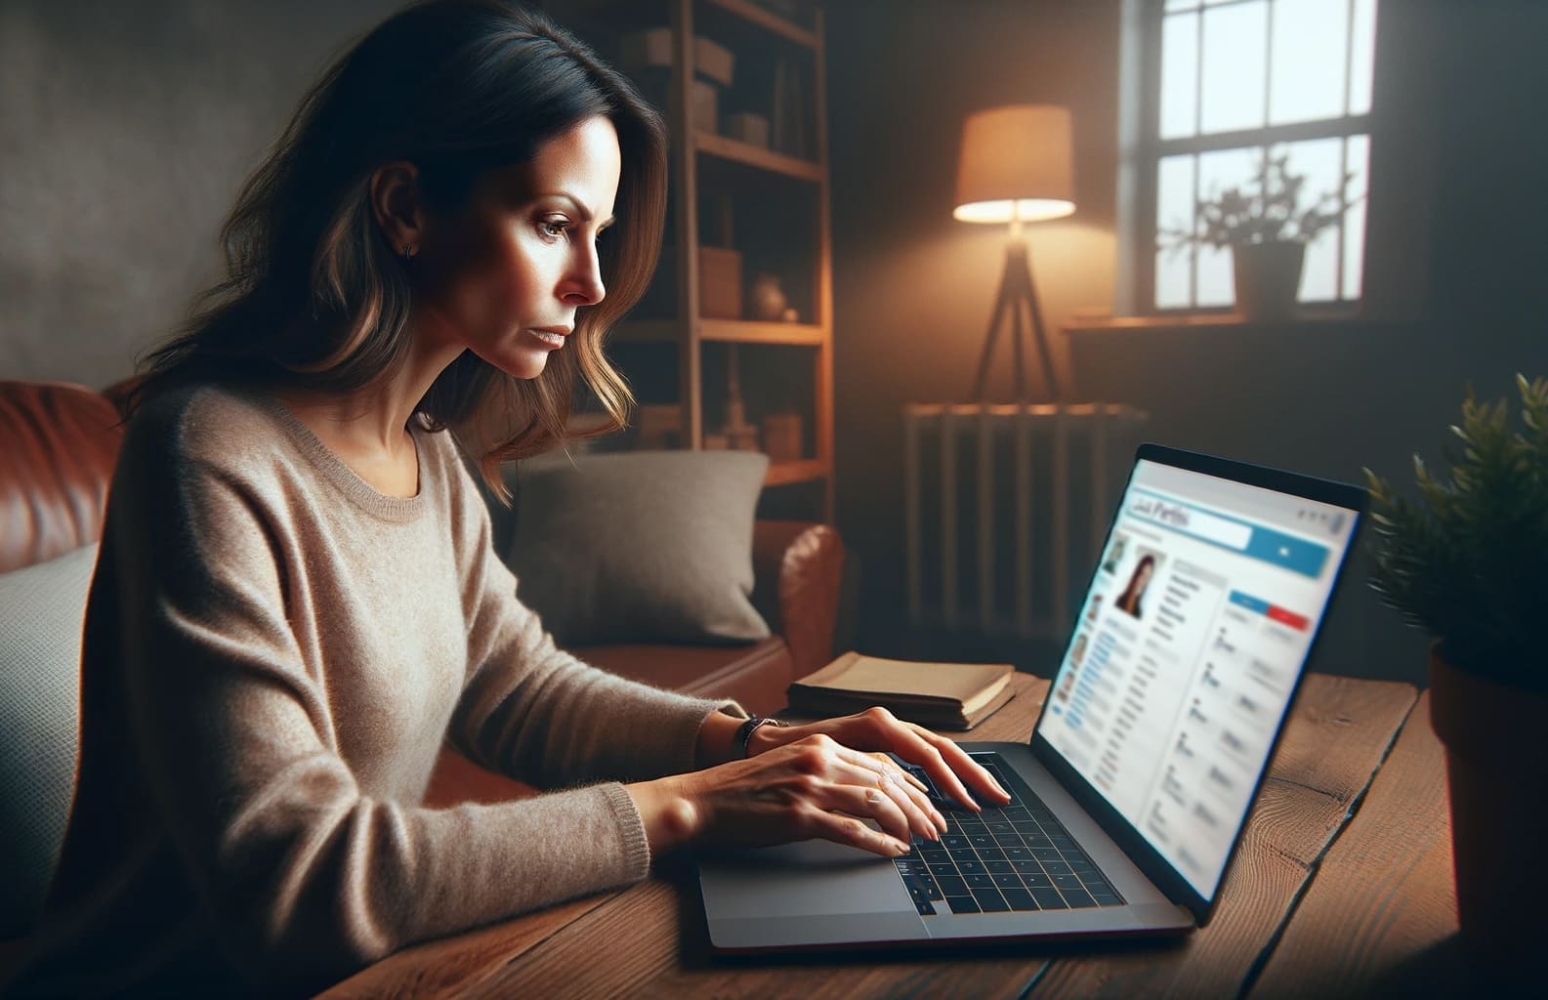 A woman sitting at her desk in a home setting, focused on user profiles on her laptop, looking at the screen where a mobile people-finding app is open